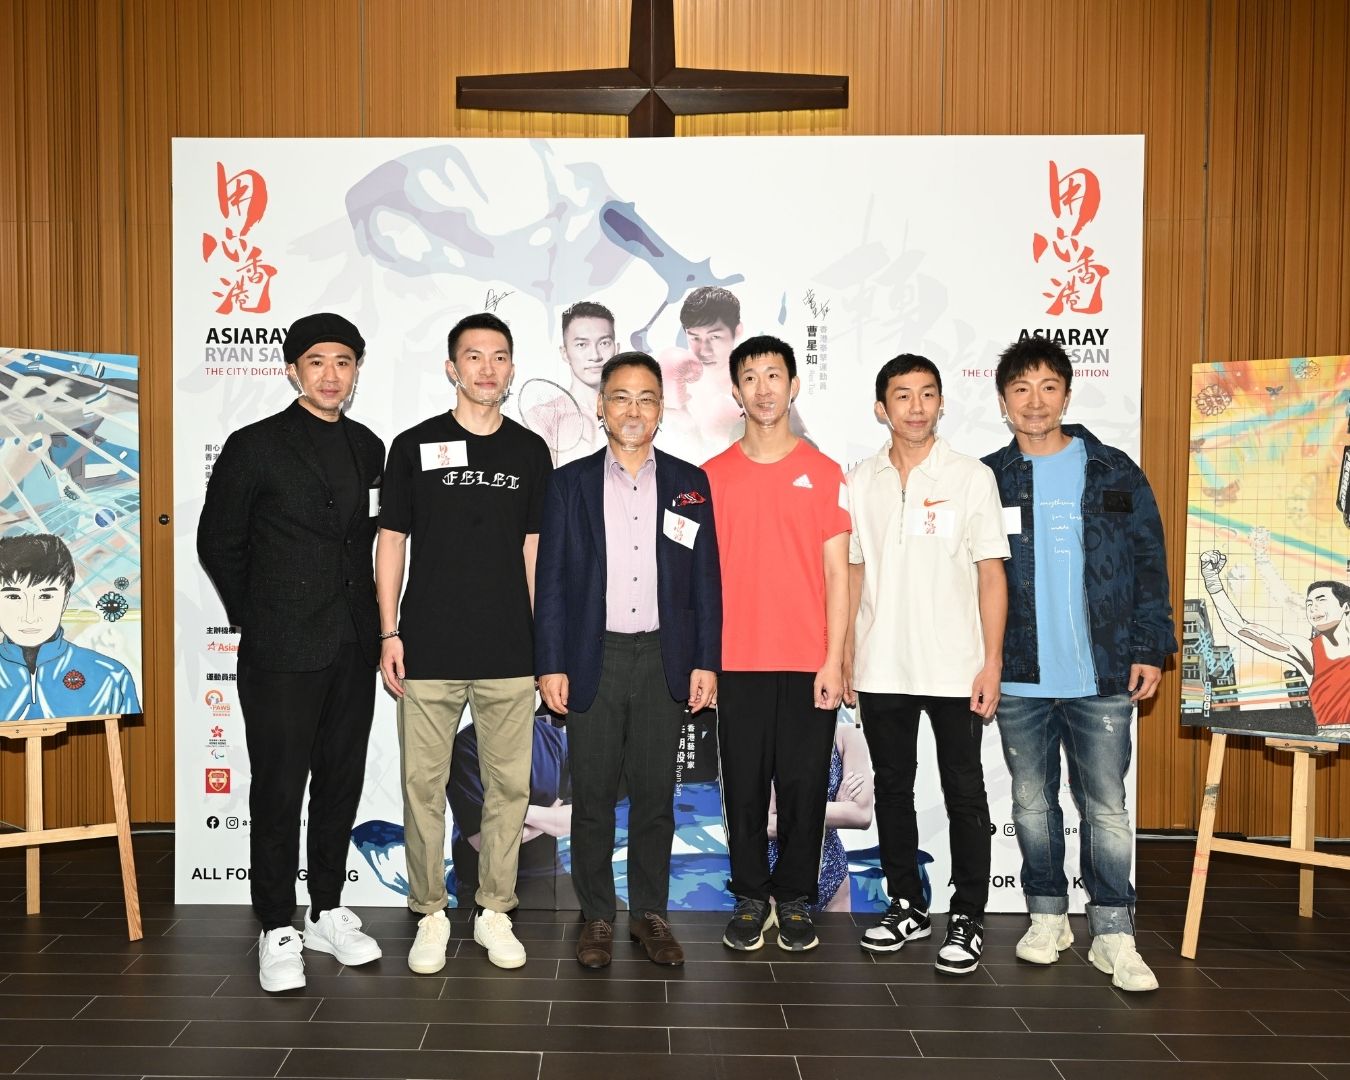 Mr. So Wah Wai, BBS, MH and the representatives of Hong Kong Paralympic Committee attended the unveiling ceremony of Asia's first outdoor digital gallery project